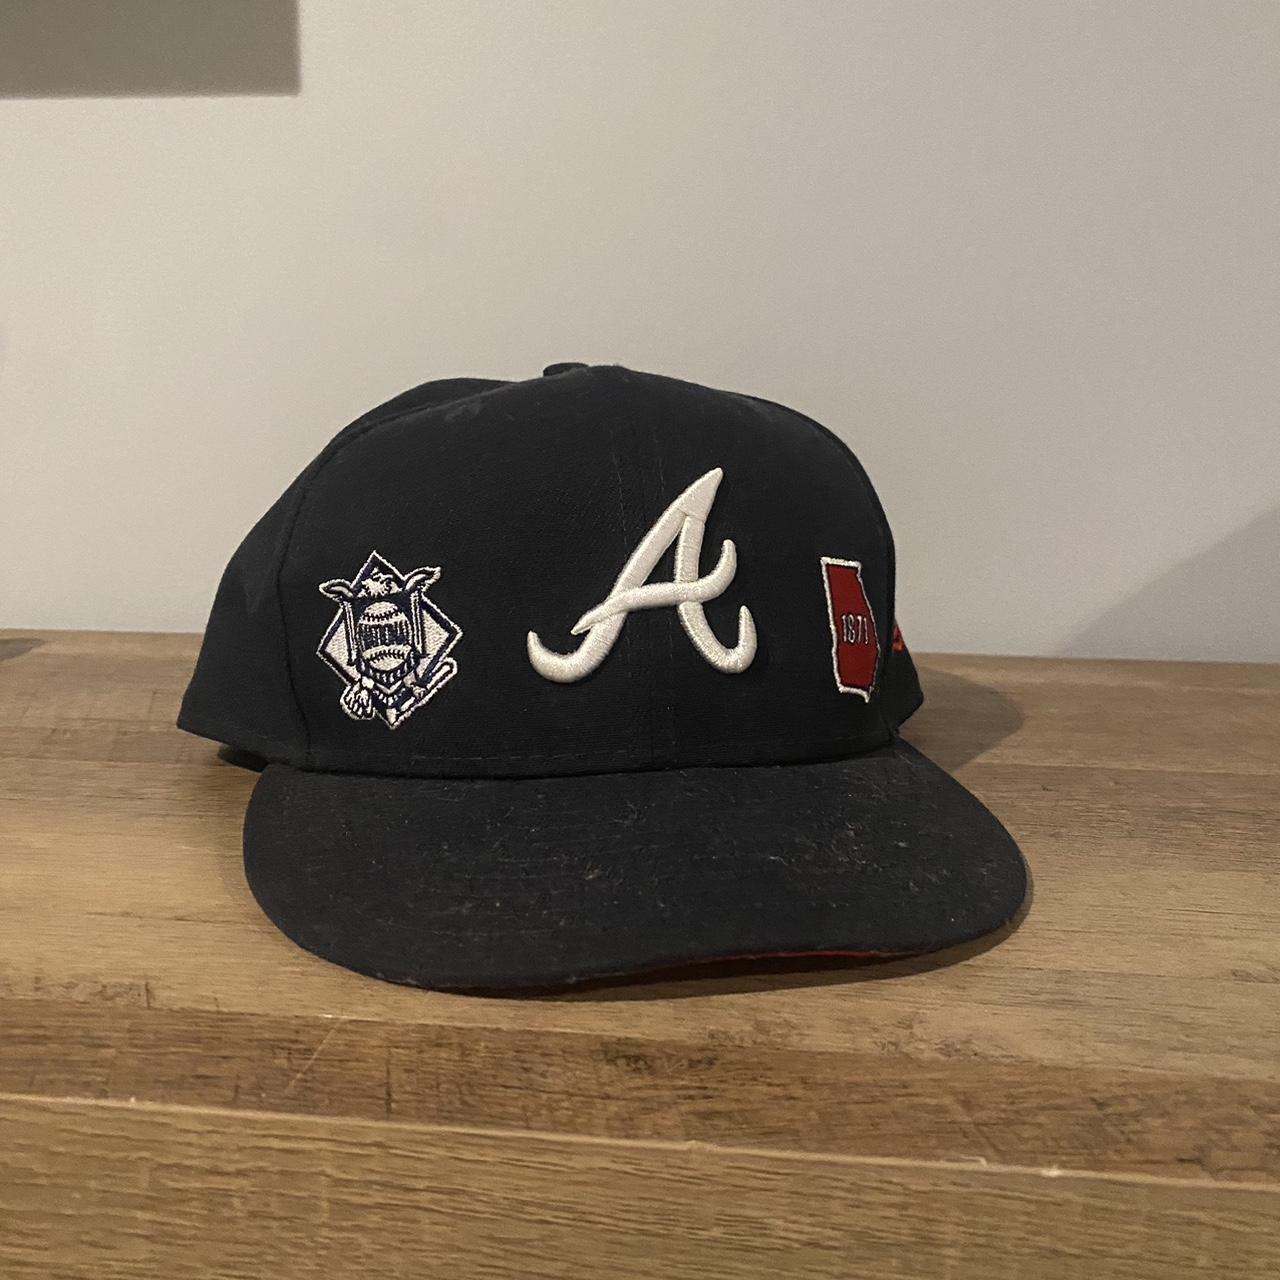 New Era Atlanta Braves Suede Leather Fitted Hat - Depop